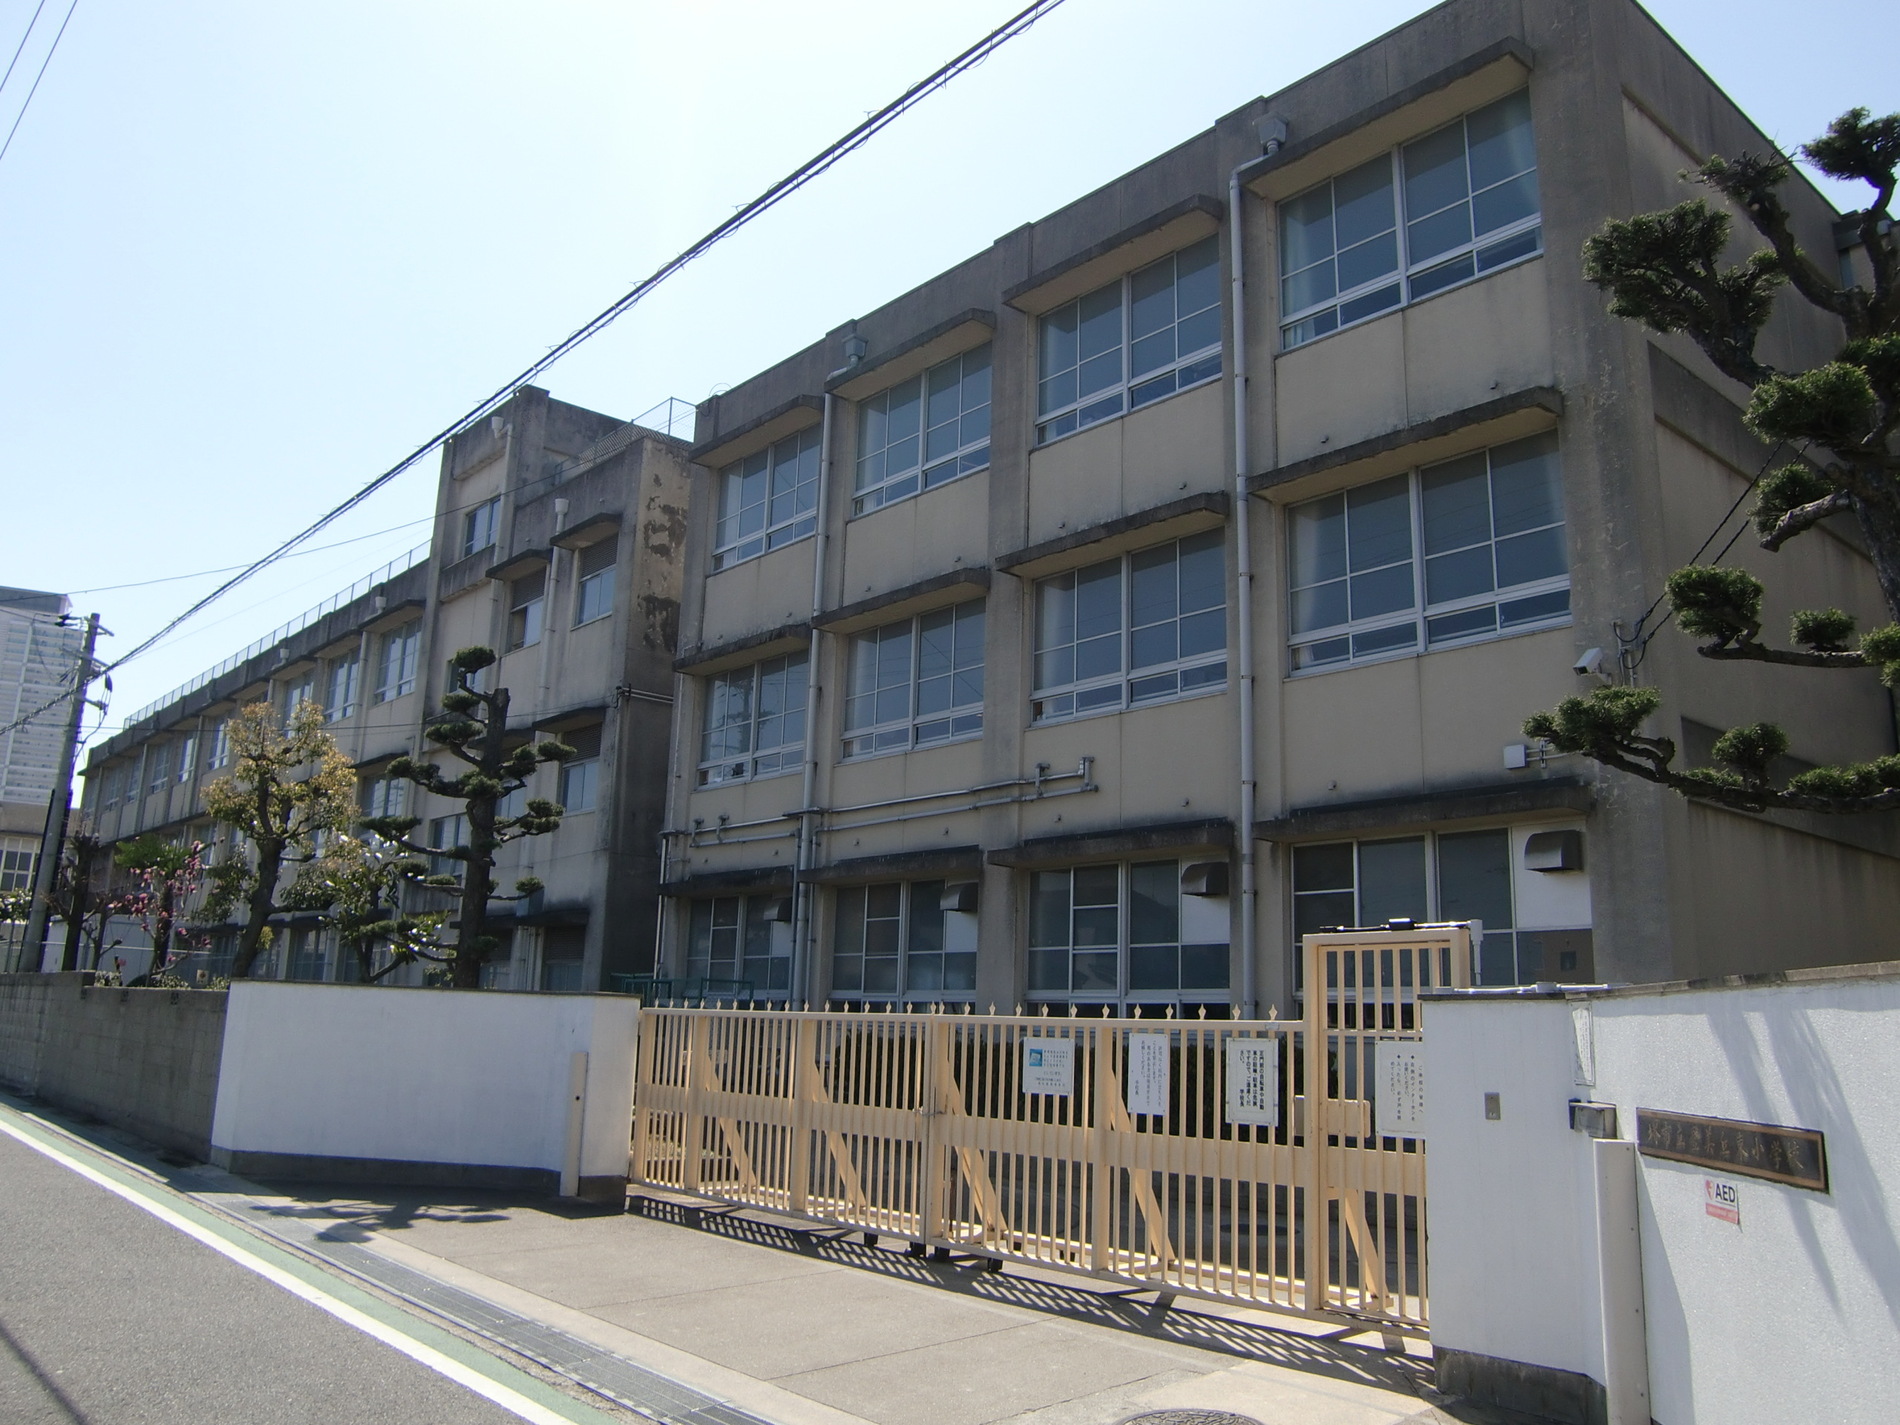 Primary school. Grow Tomi Okahigashi sensibility of 640m children to elementary school, Important time. Effortlessly every day of school because an 8-minute walk